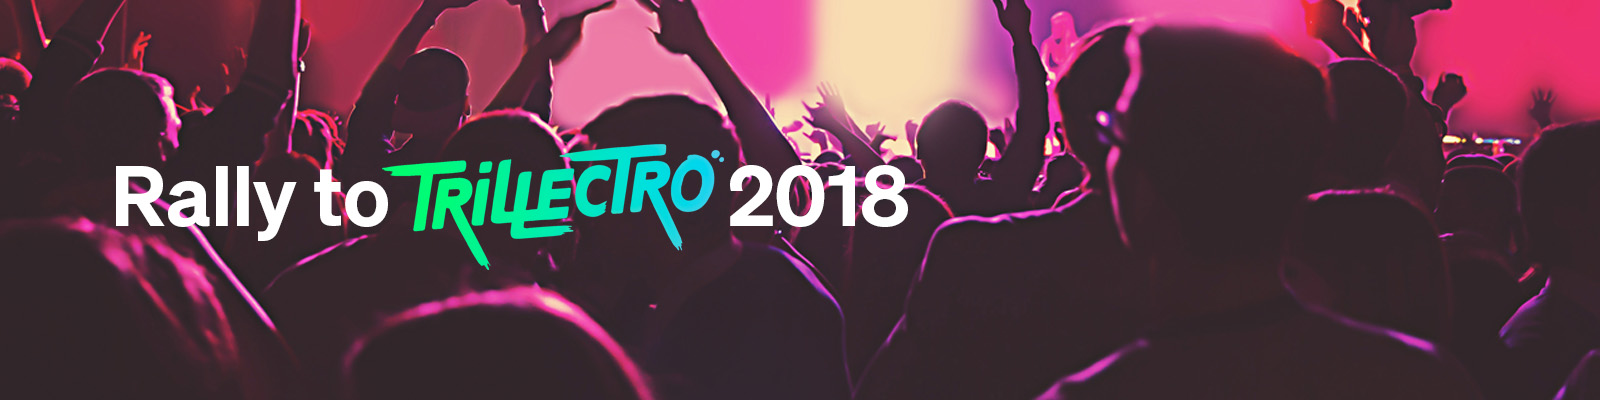 Trillectro 2018